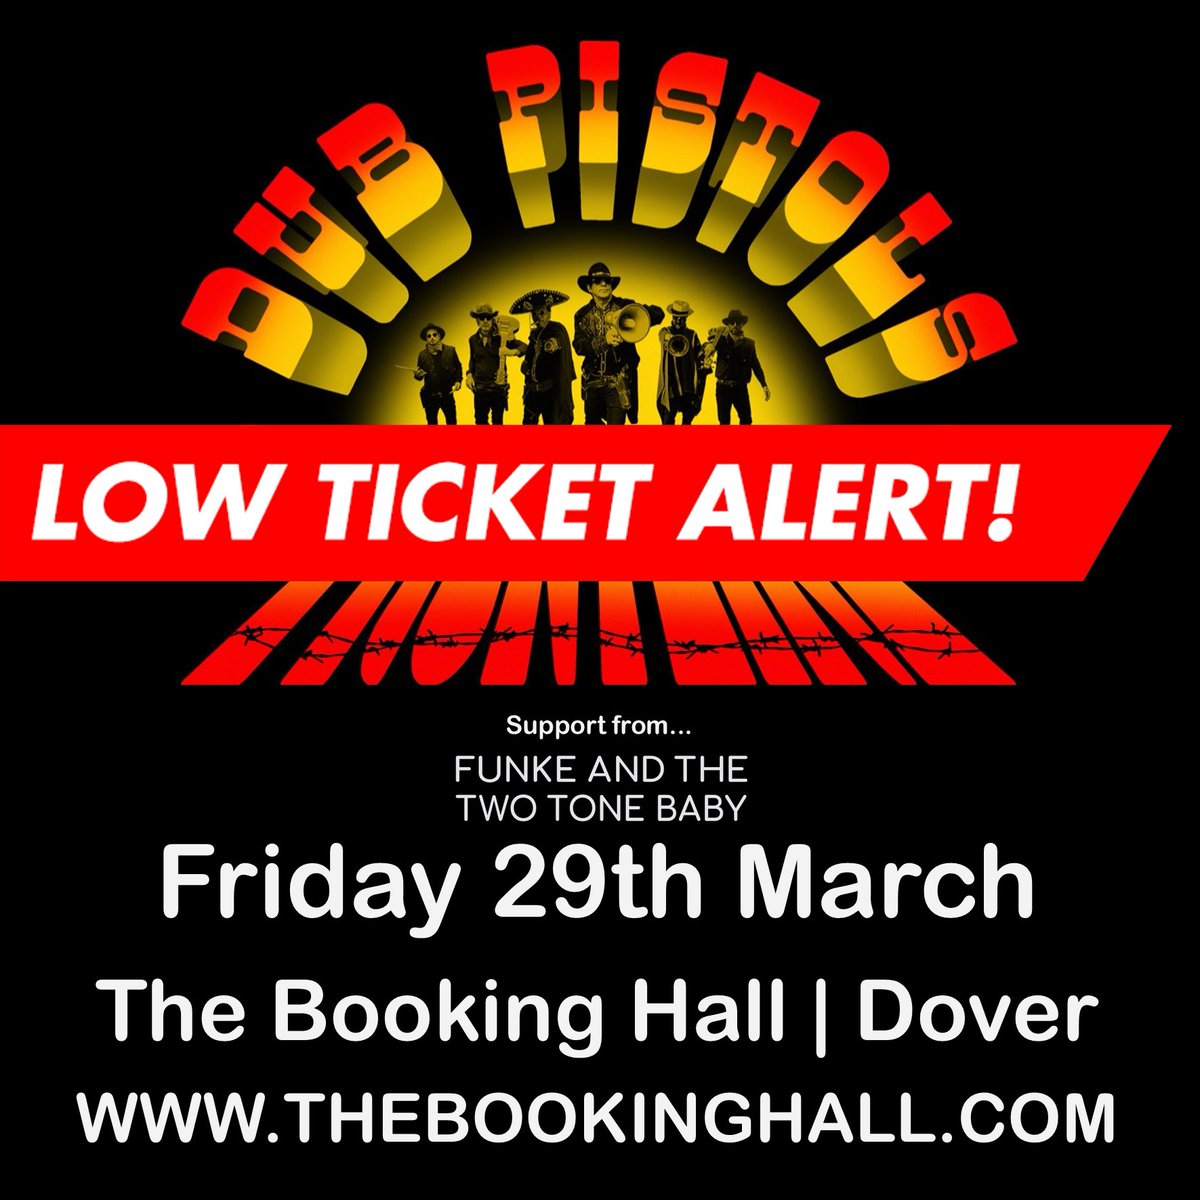 LAST CHANCE! Limited tickets remaining for @dubpistols live tonight!